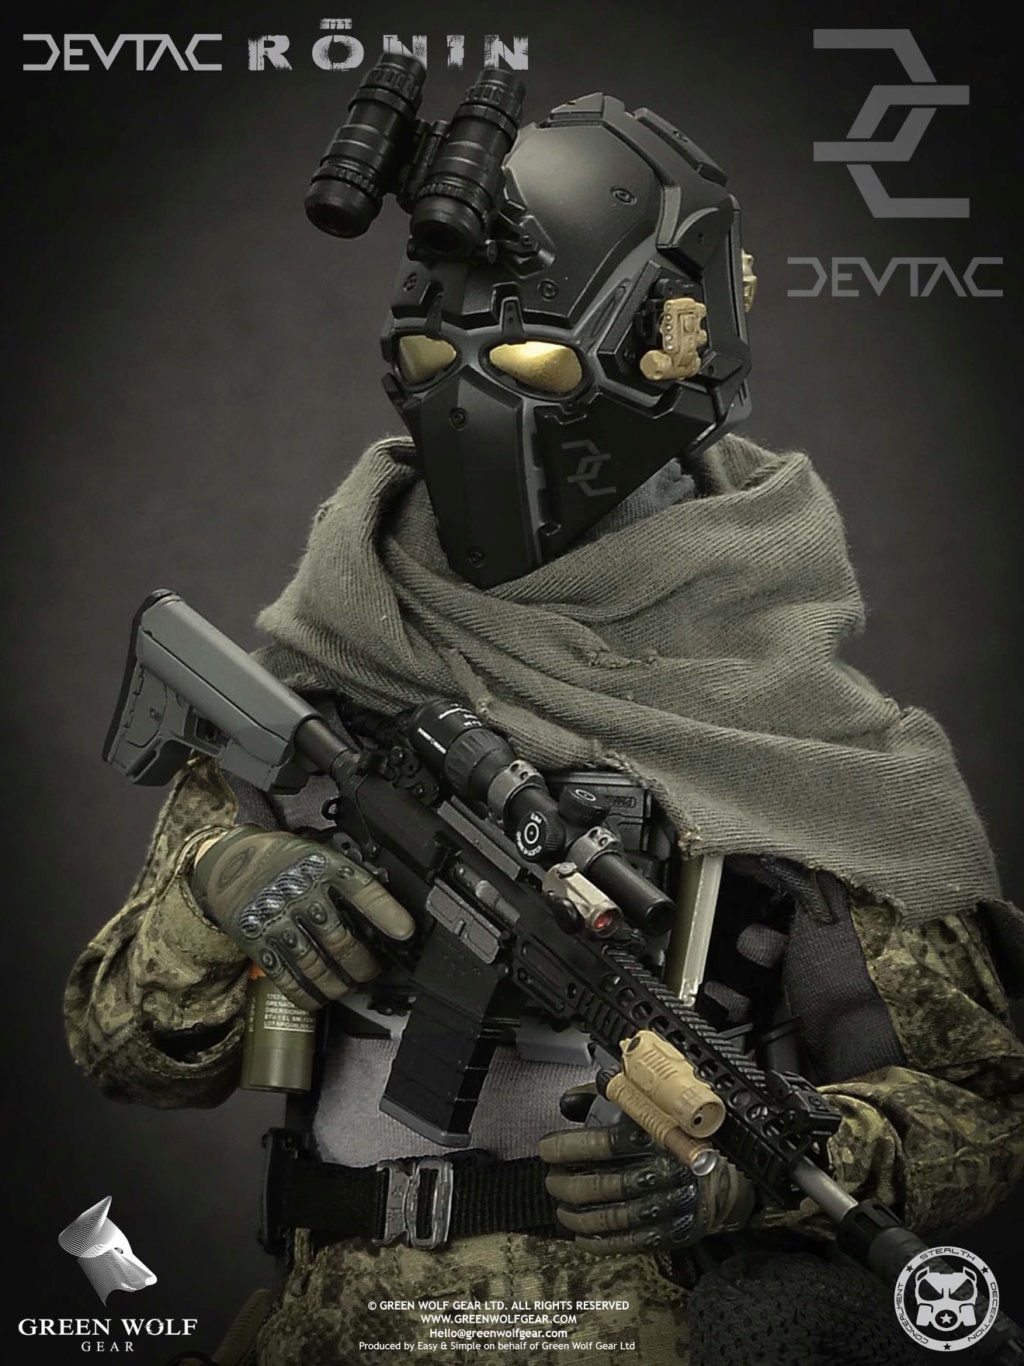 NEW PRODUCT: Green Wolf Gear DEVTAC Ronin 1/6 Action Figure (VS2434P) 1532